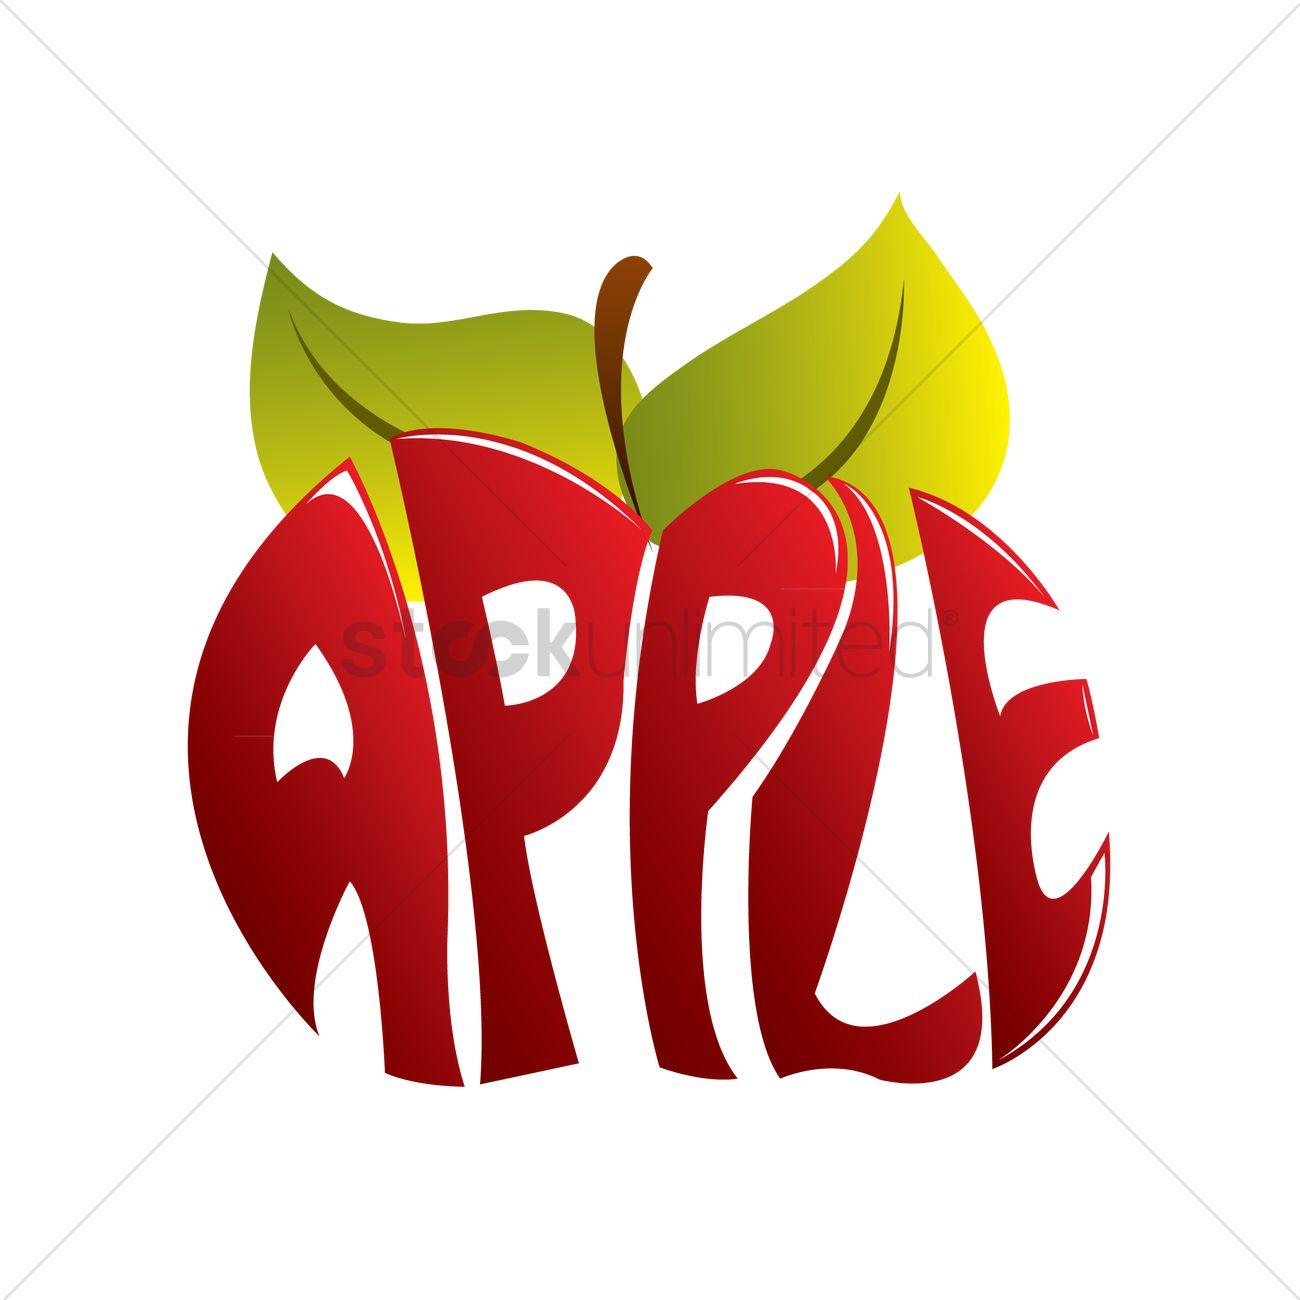 Apple Word Logo - Typography of the word apple Vector Image - 1237964 | StockUnlimited